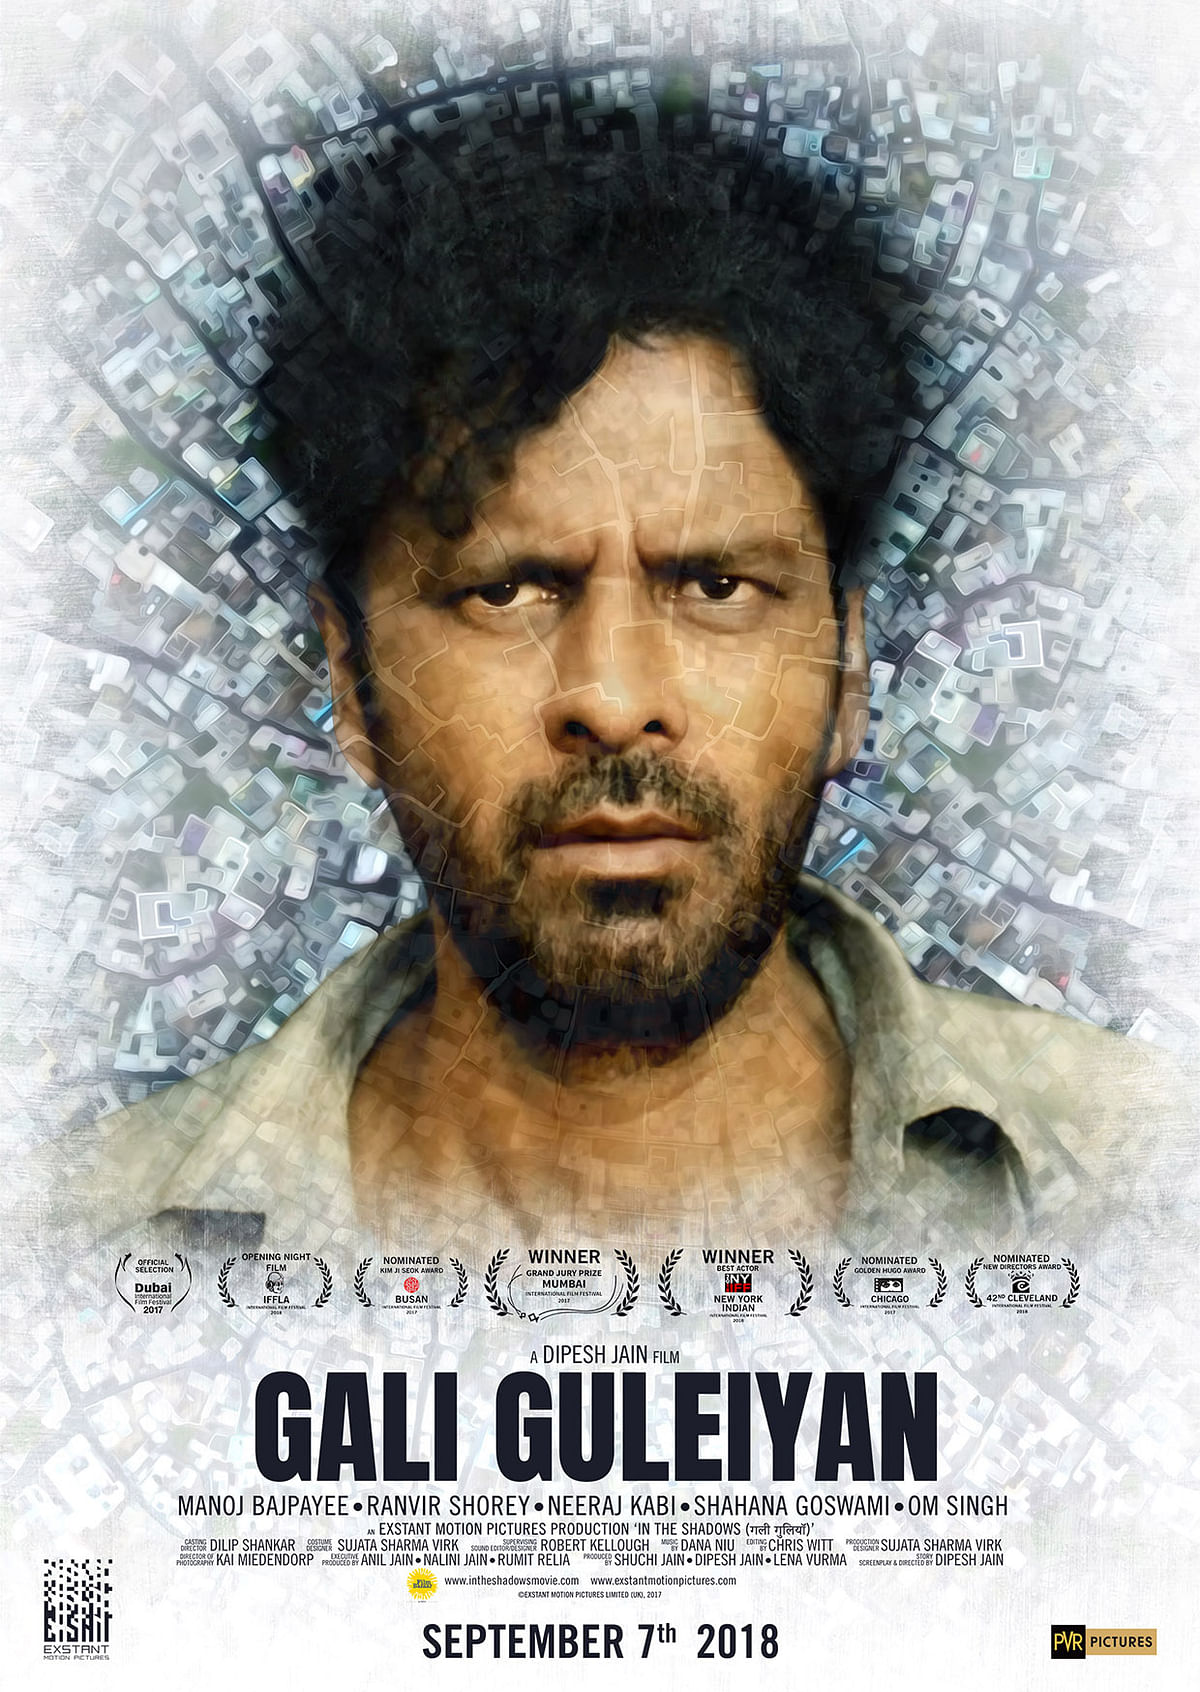 Find out why Manoj Bajpayee is at his best in ‘Gali Guleiyan’.